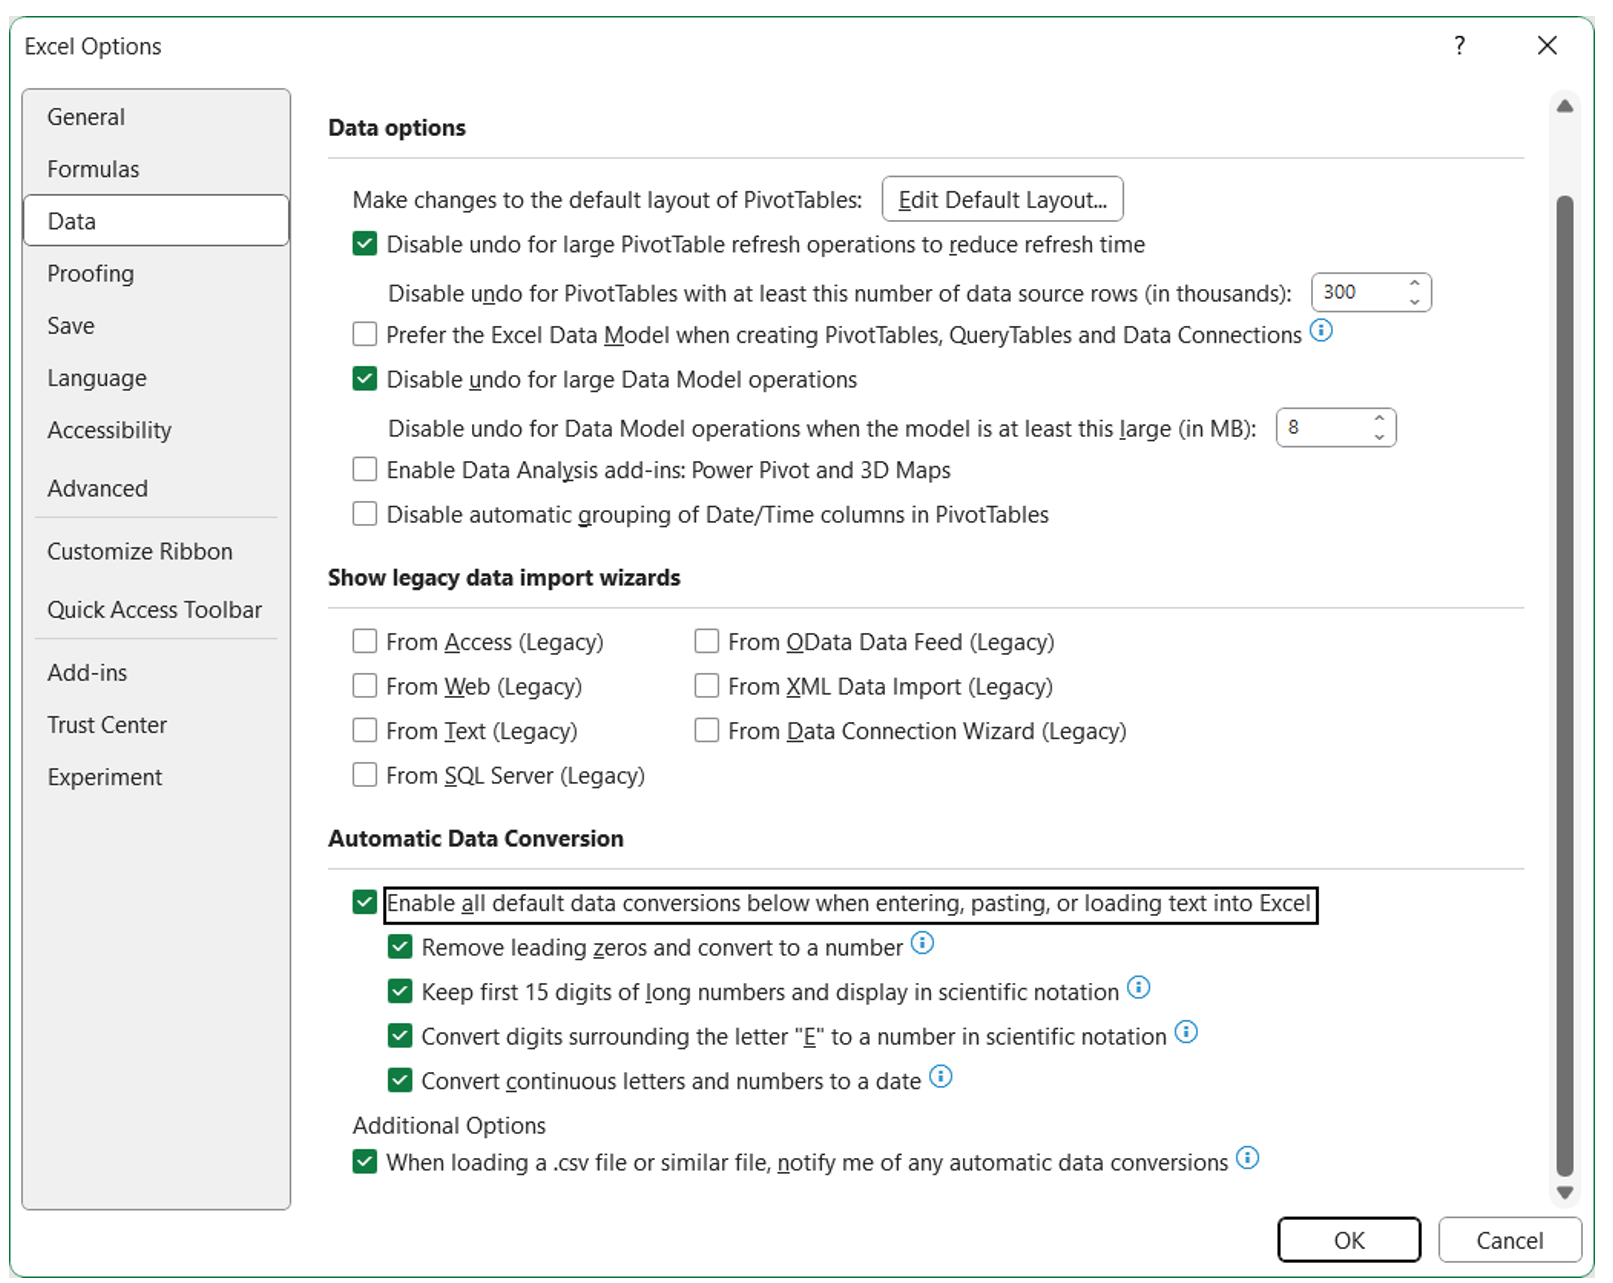 Excel Options dialog box with Automatic Data Conversion section selected